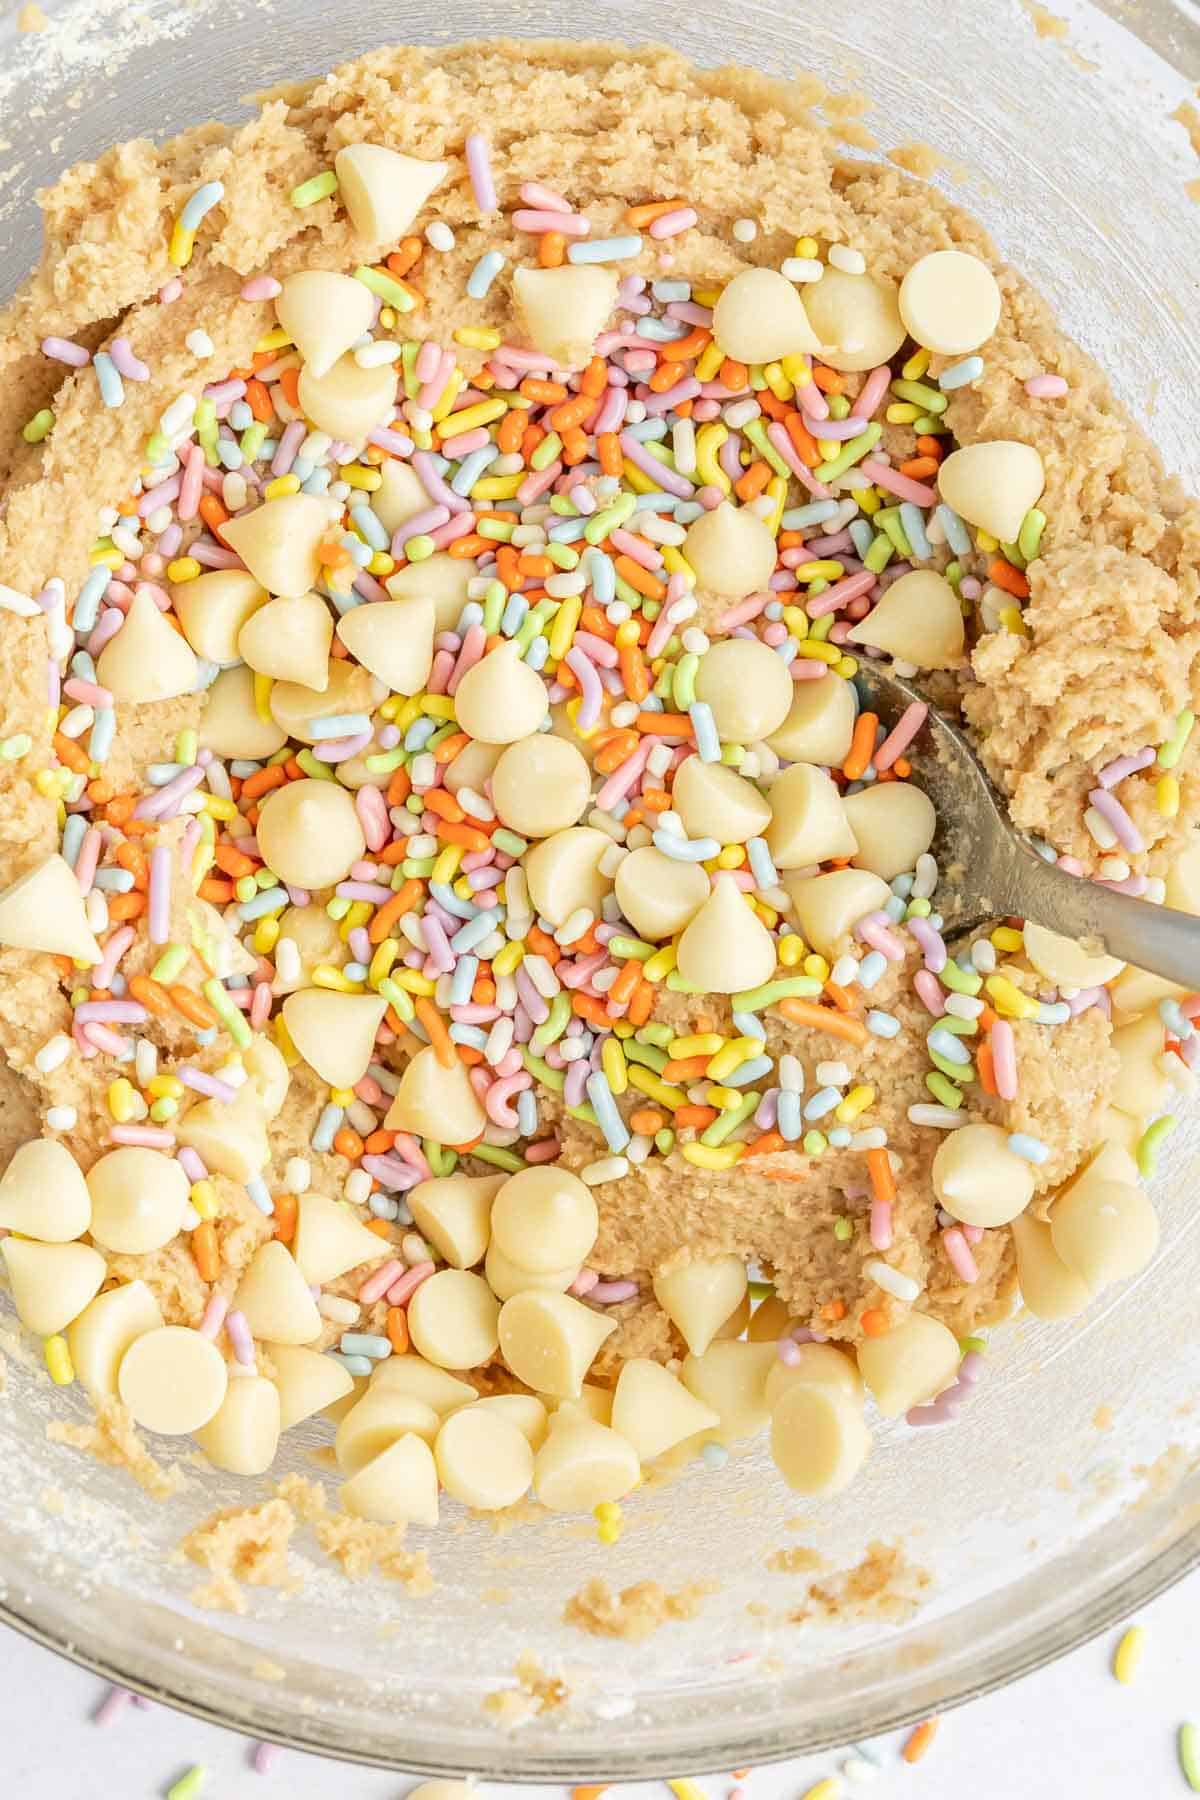 Top view of gluten free birthday cake cookie dough in a glass mixing bowl with a spoon.